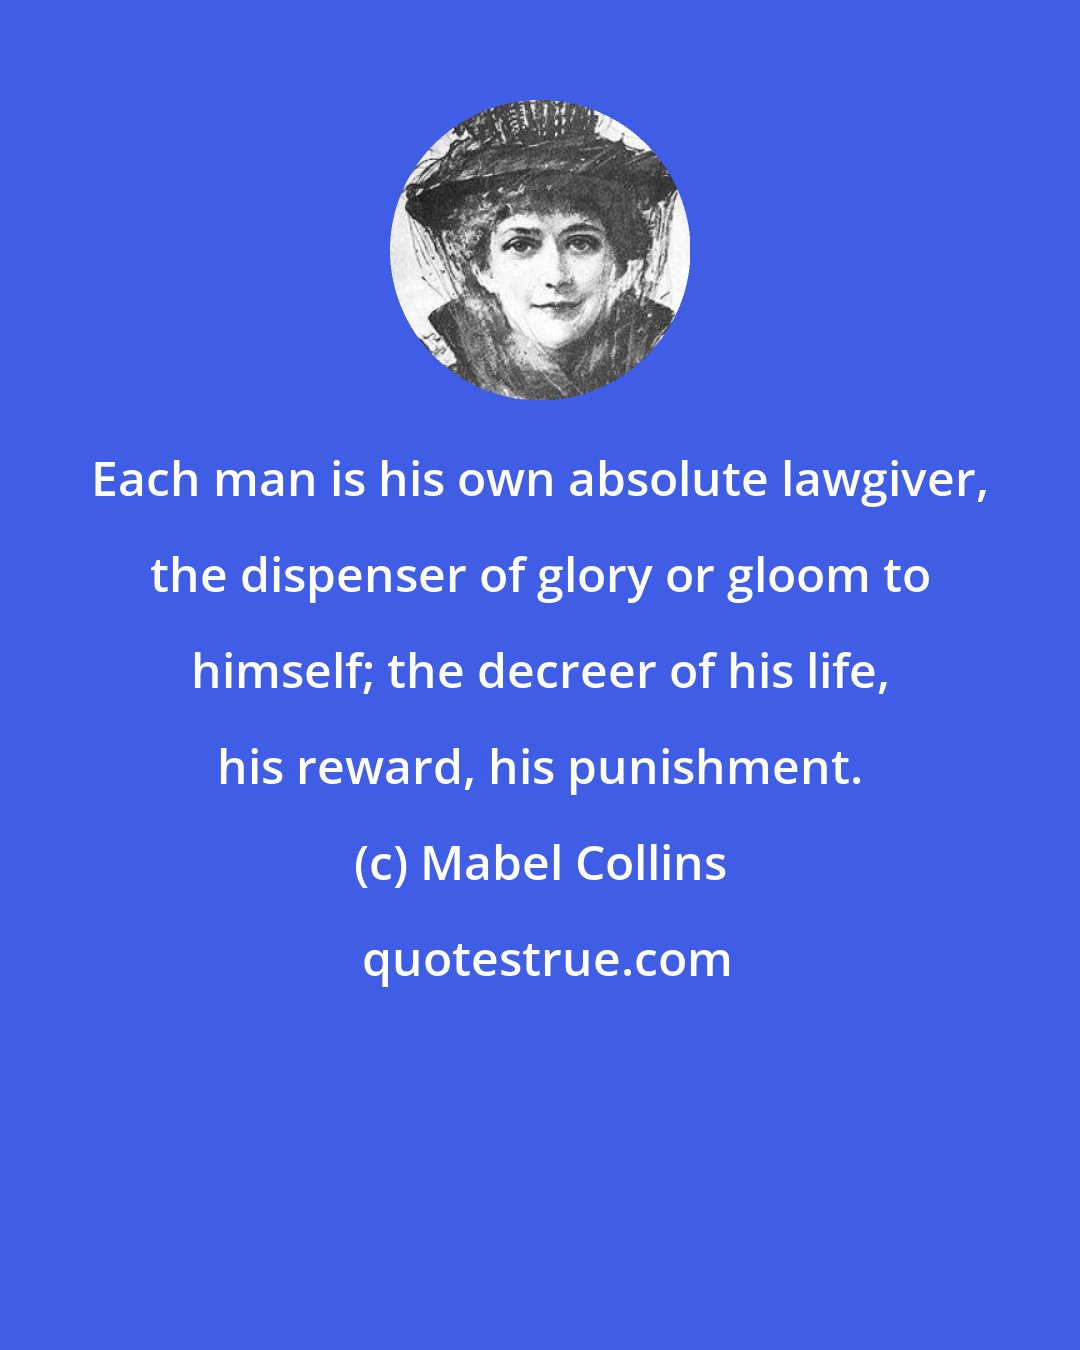 Mabel Collins: Each man is his own absolute lawgiver, the dispenser of glory or gloom to himself; the decreer of his life, his reward, his punishment.